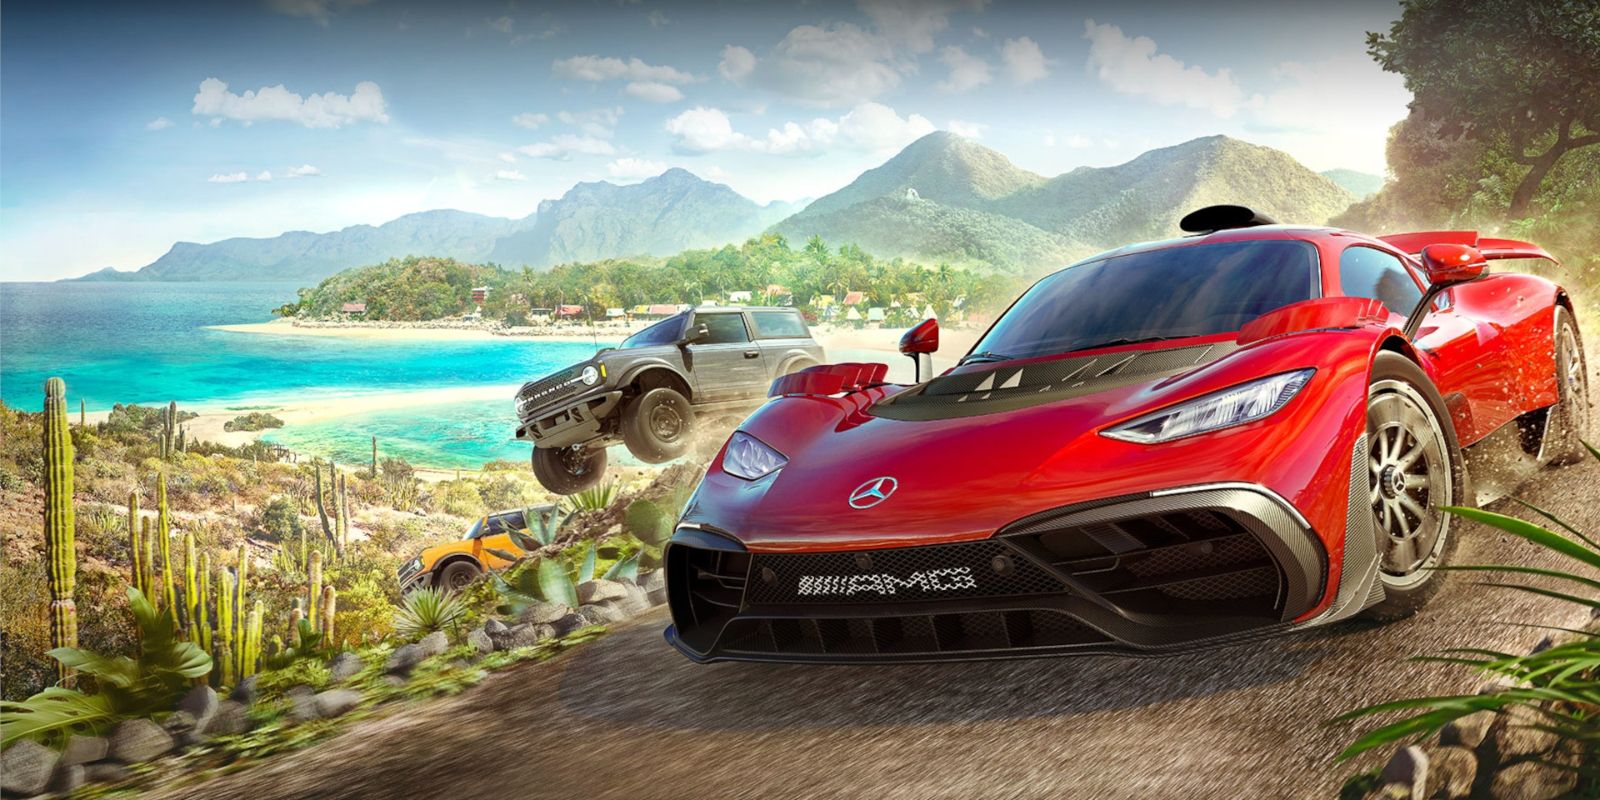 Box art for Forza Horizon 5 showing two cars on the road